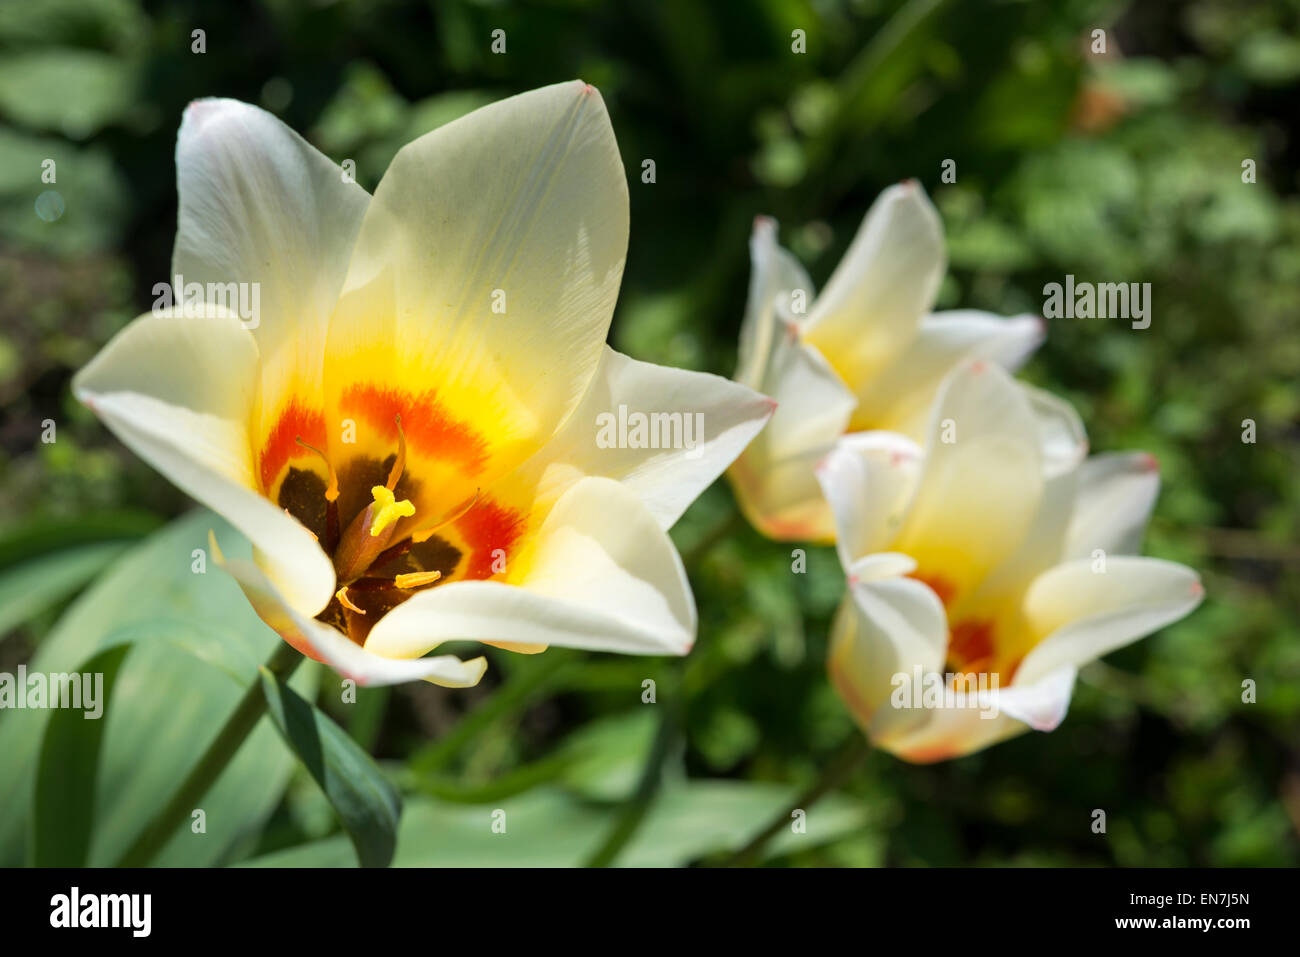 Creamy coloured Tulip flowers opening in spring sunshine. Stock Photo